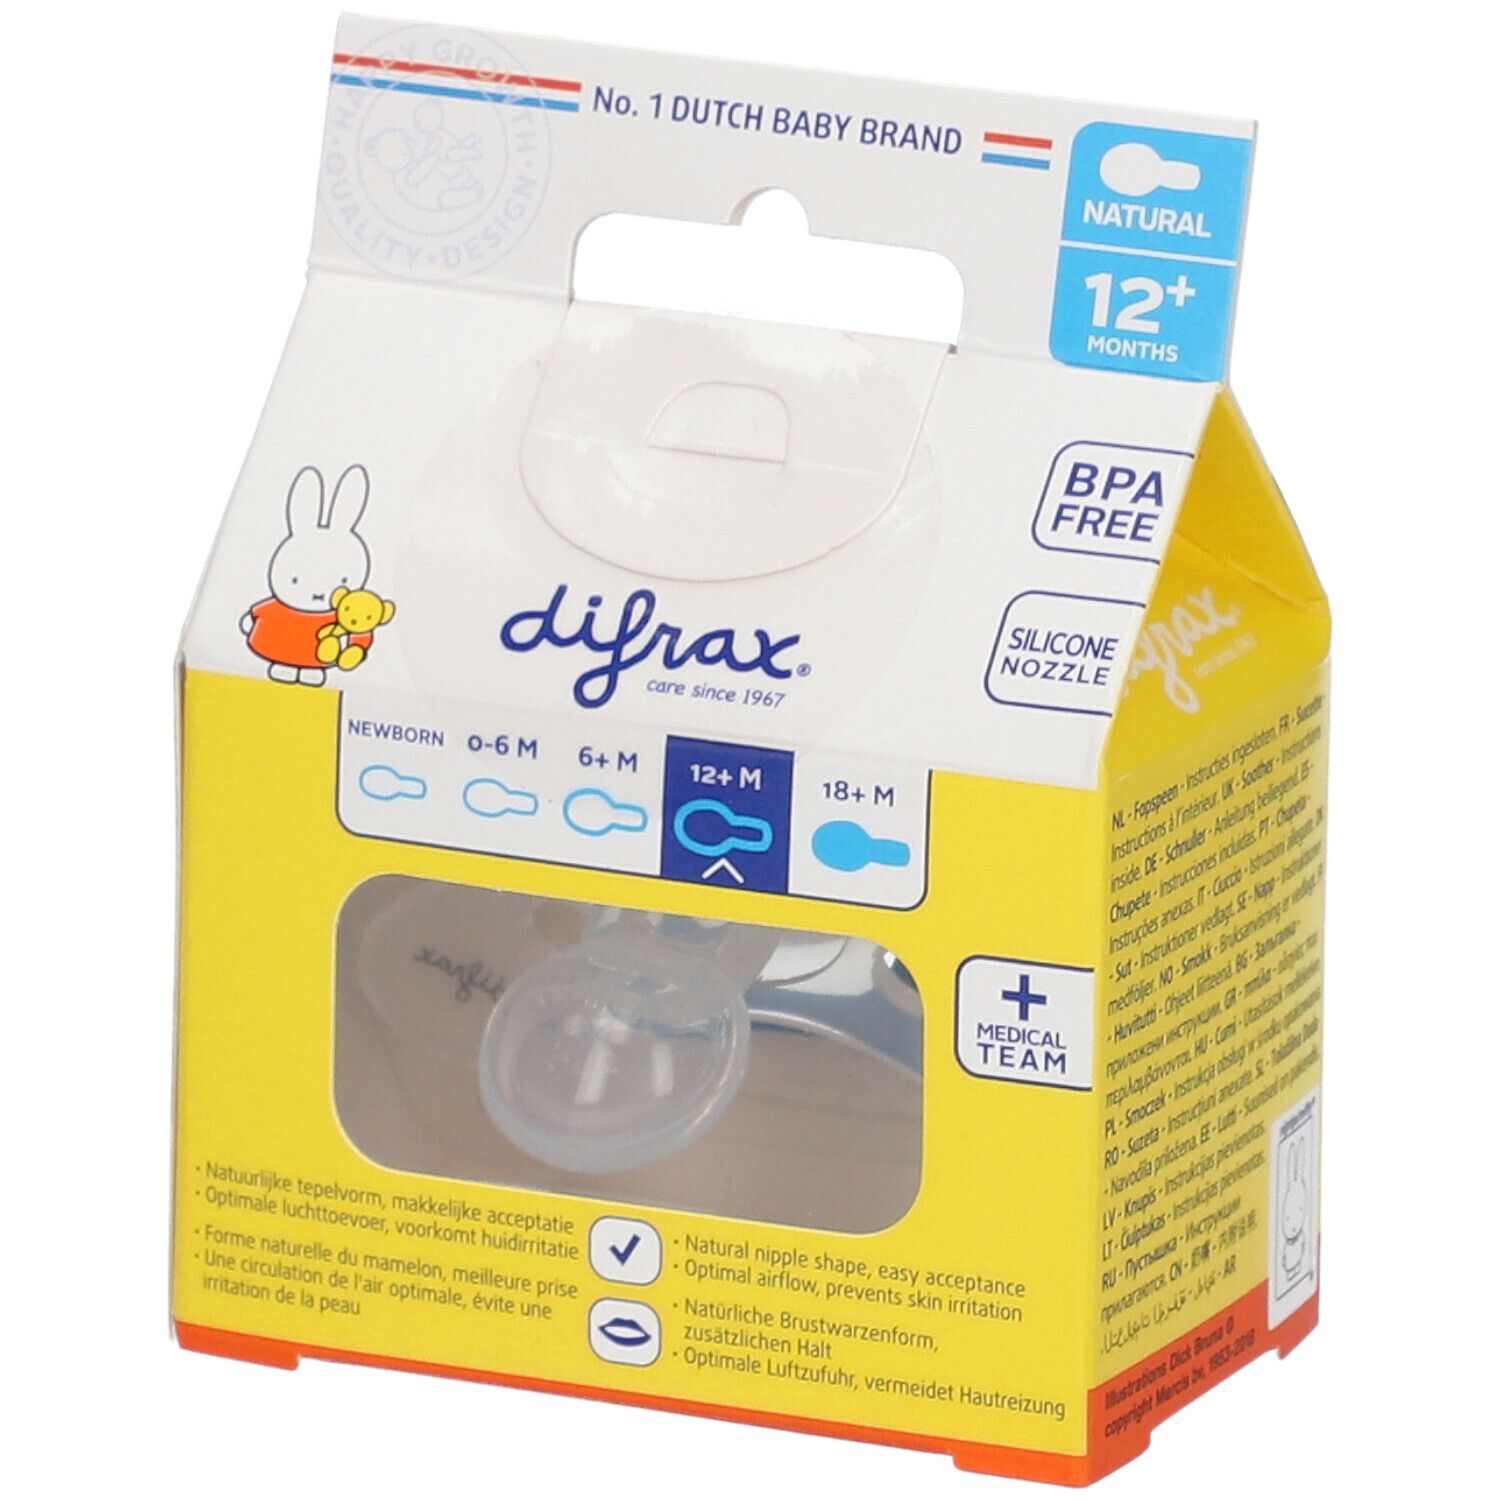 Difrax® Sucette Natural 12+ mois miffy